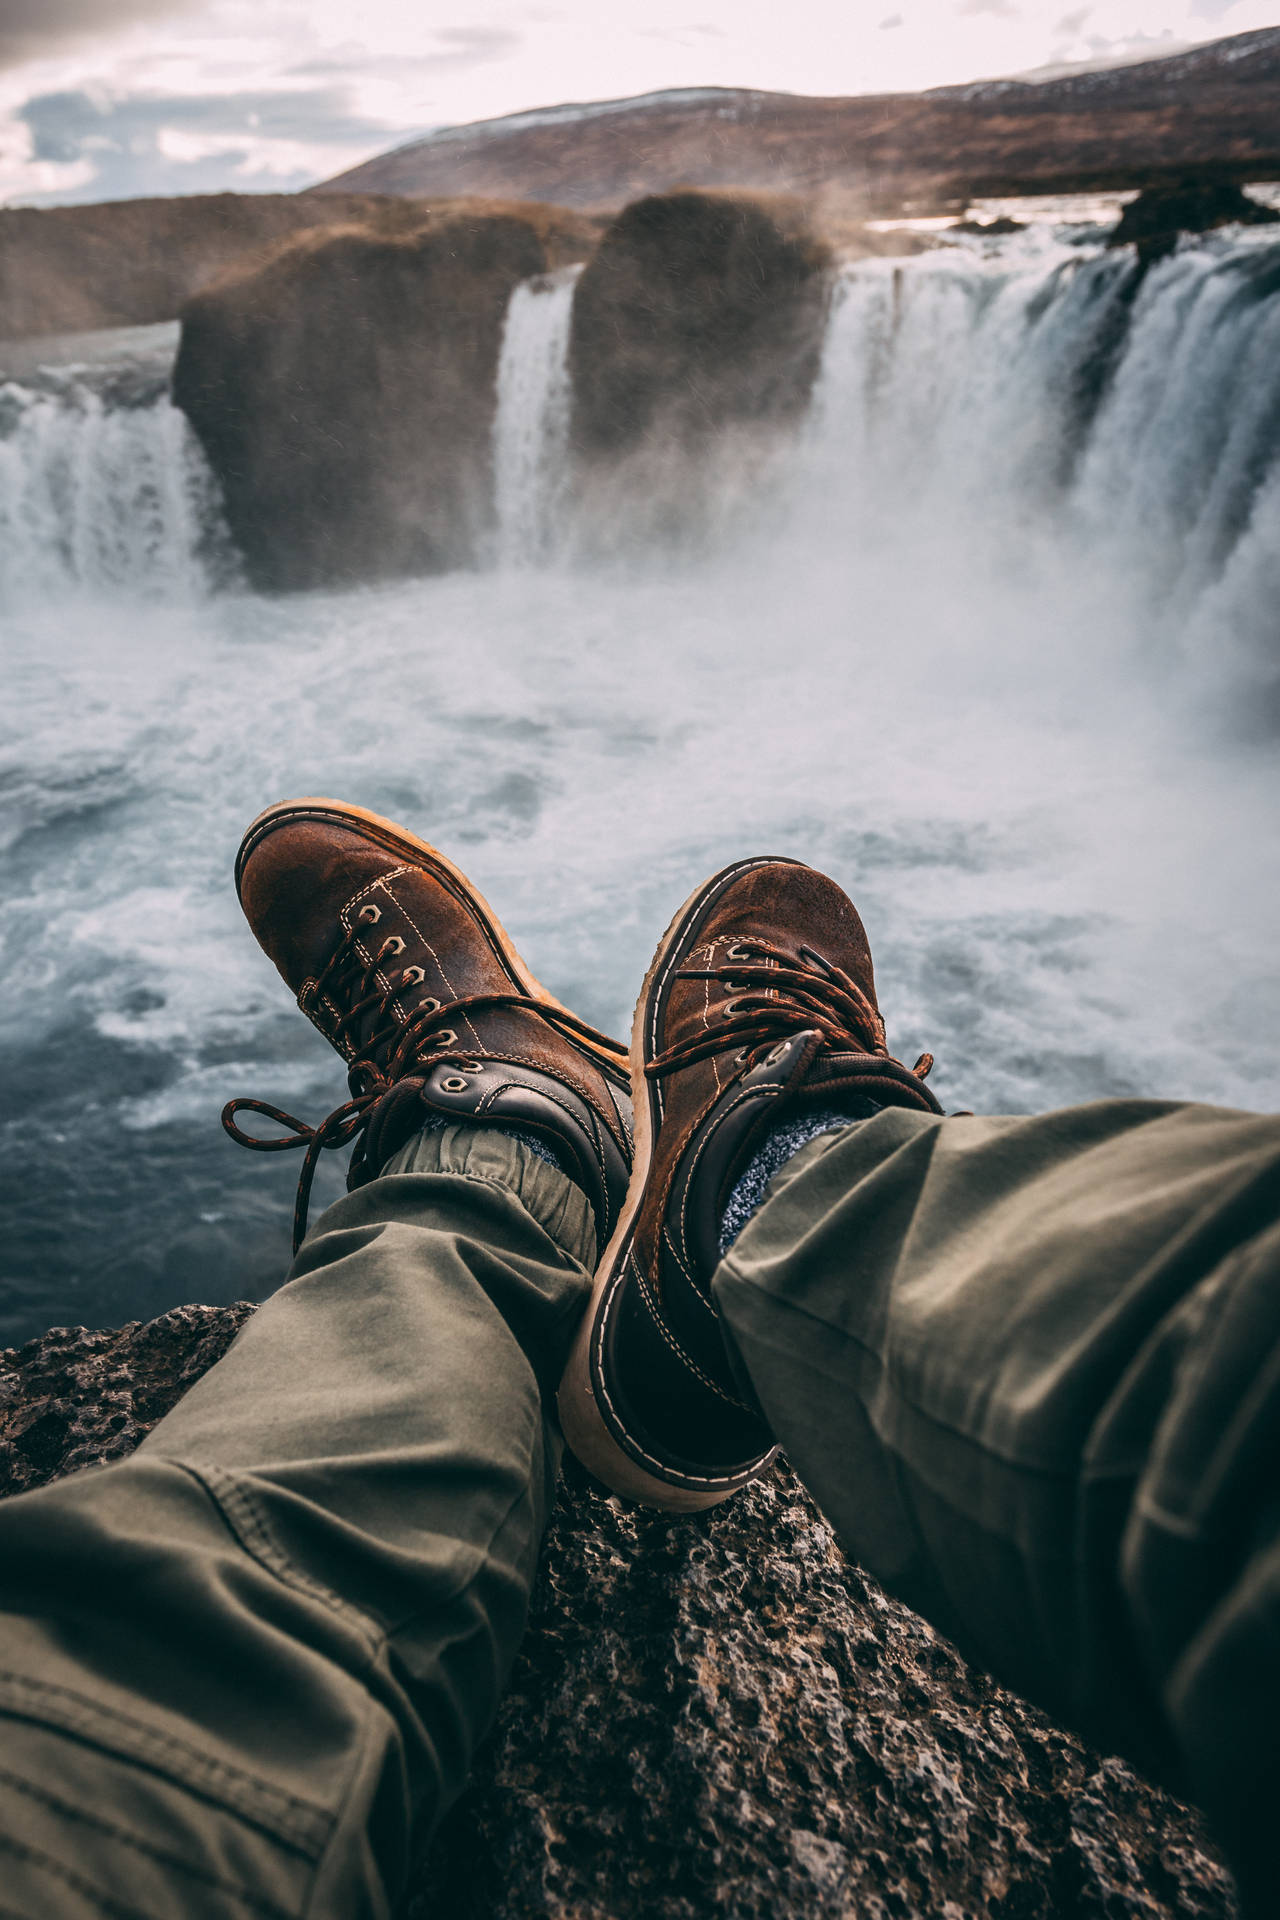 Shoes By A Waterfall Background